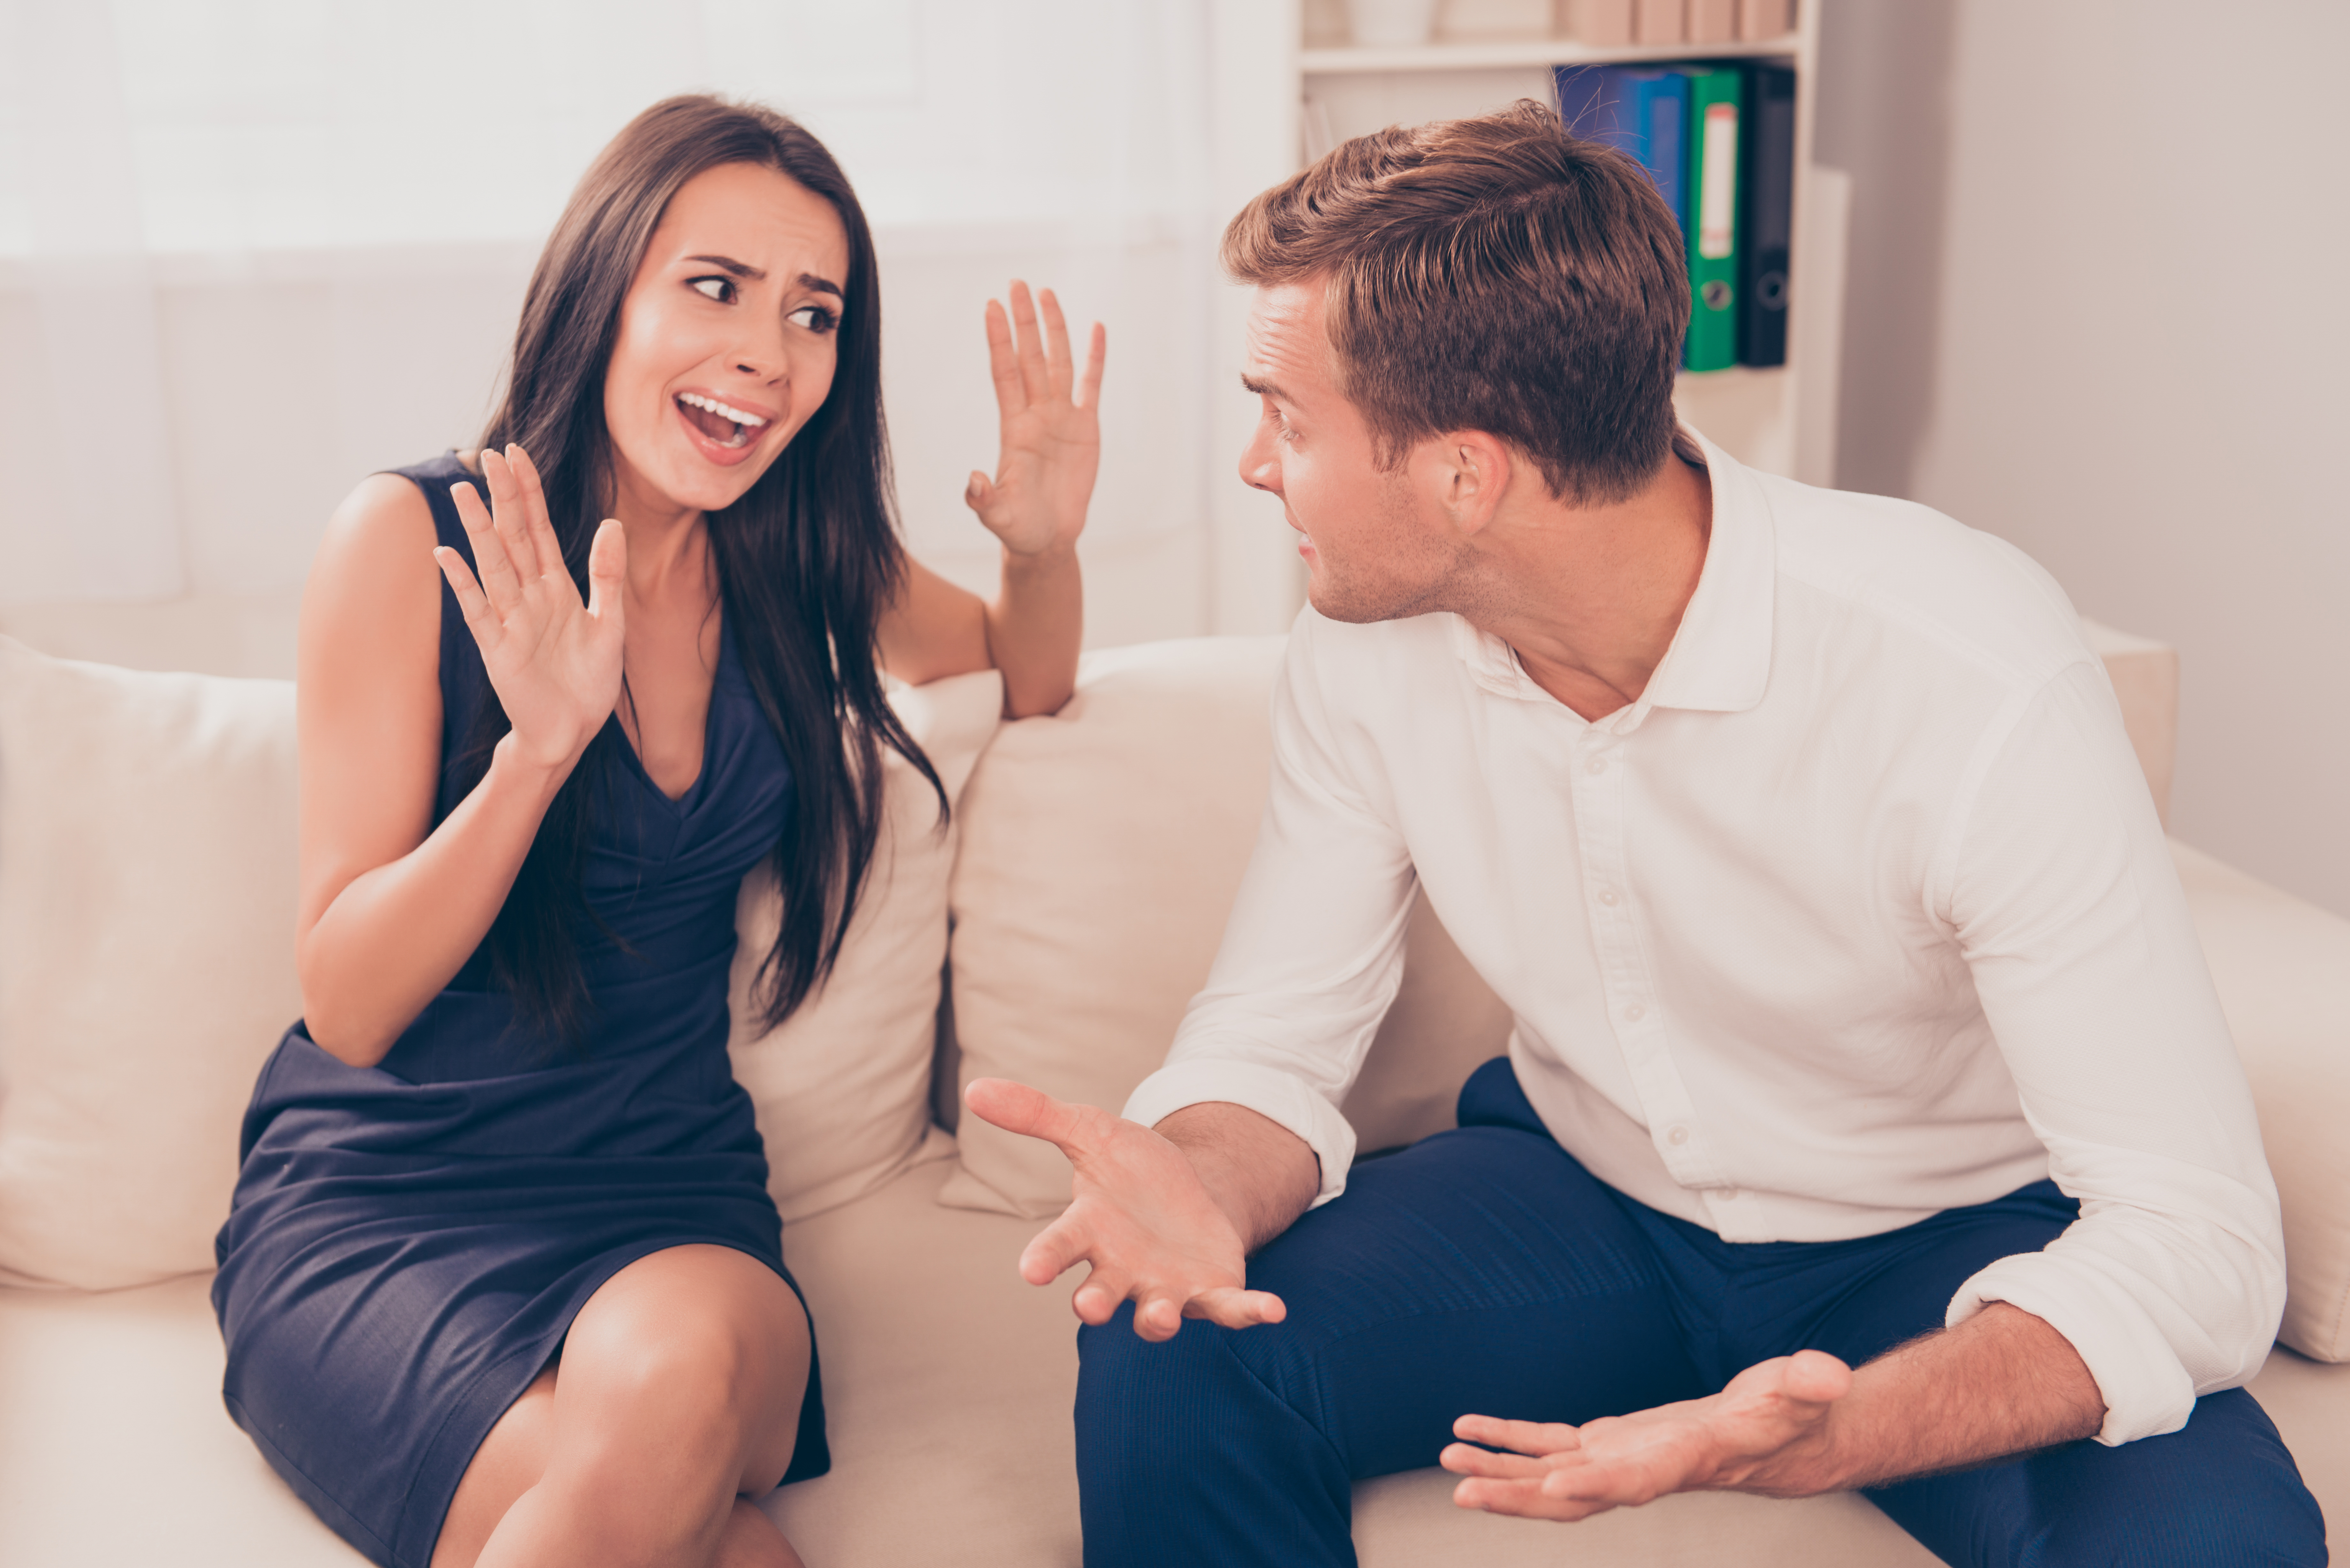 A woman having an argument with her lover | Source: Shutterstock